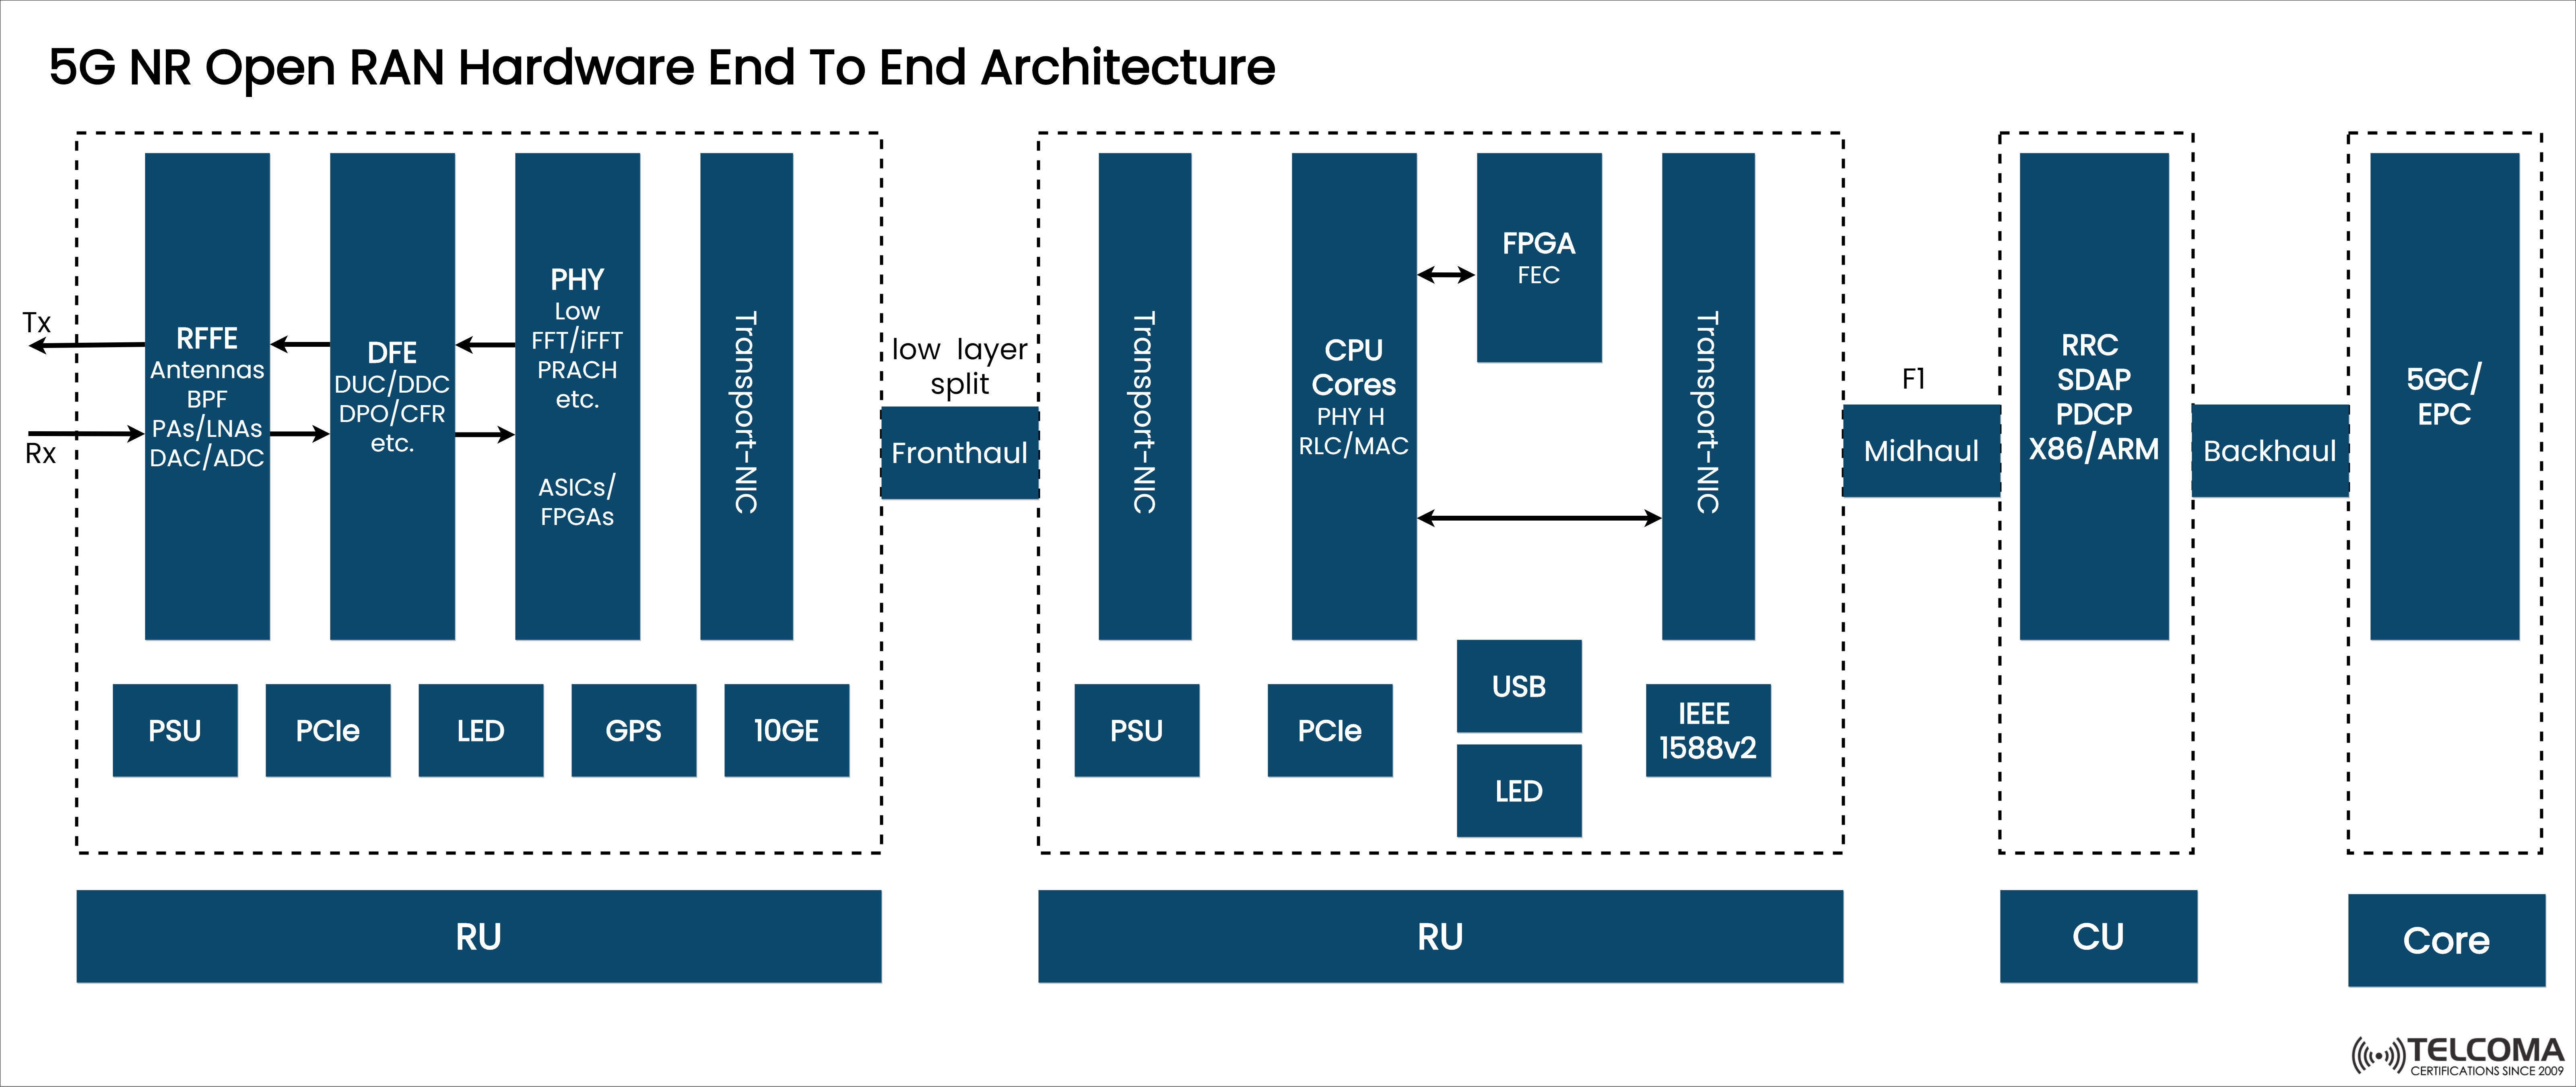 5g nr open ran hardware end to end architecture